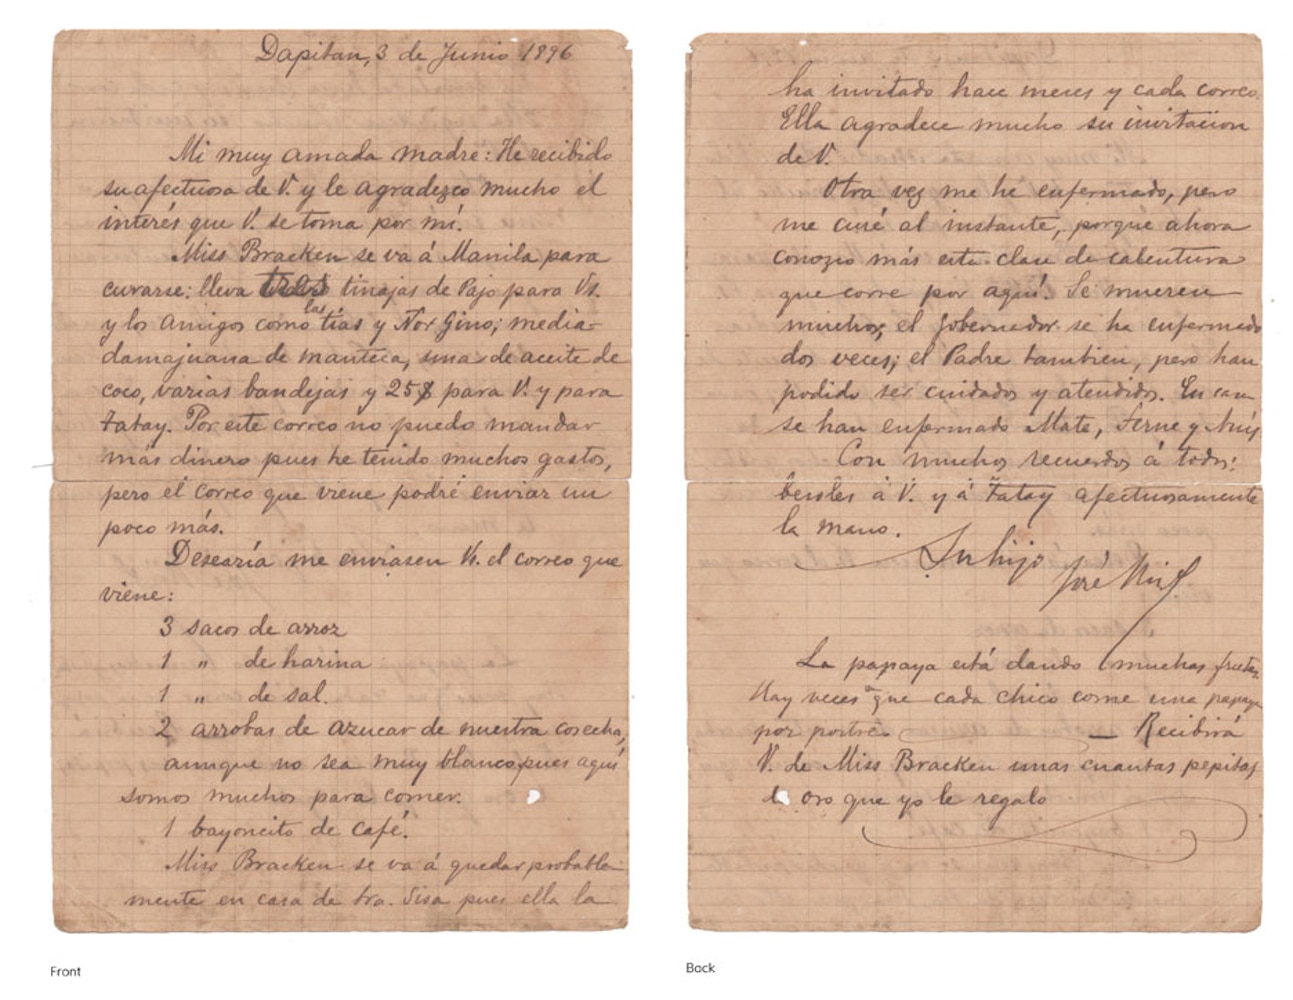 Very Rare and Important Letter from José Rizal to His Mother (Teodora Alonso)